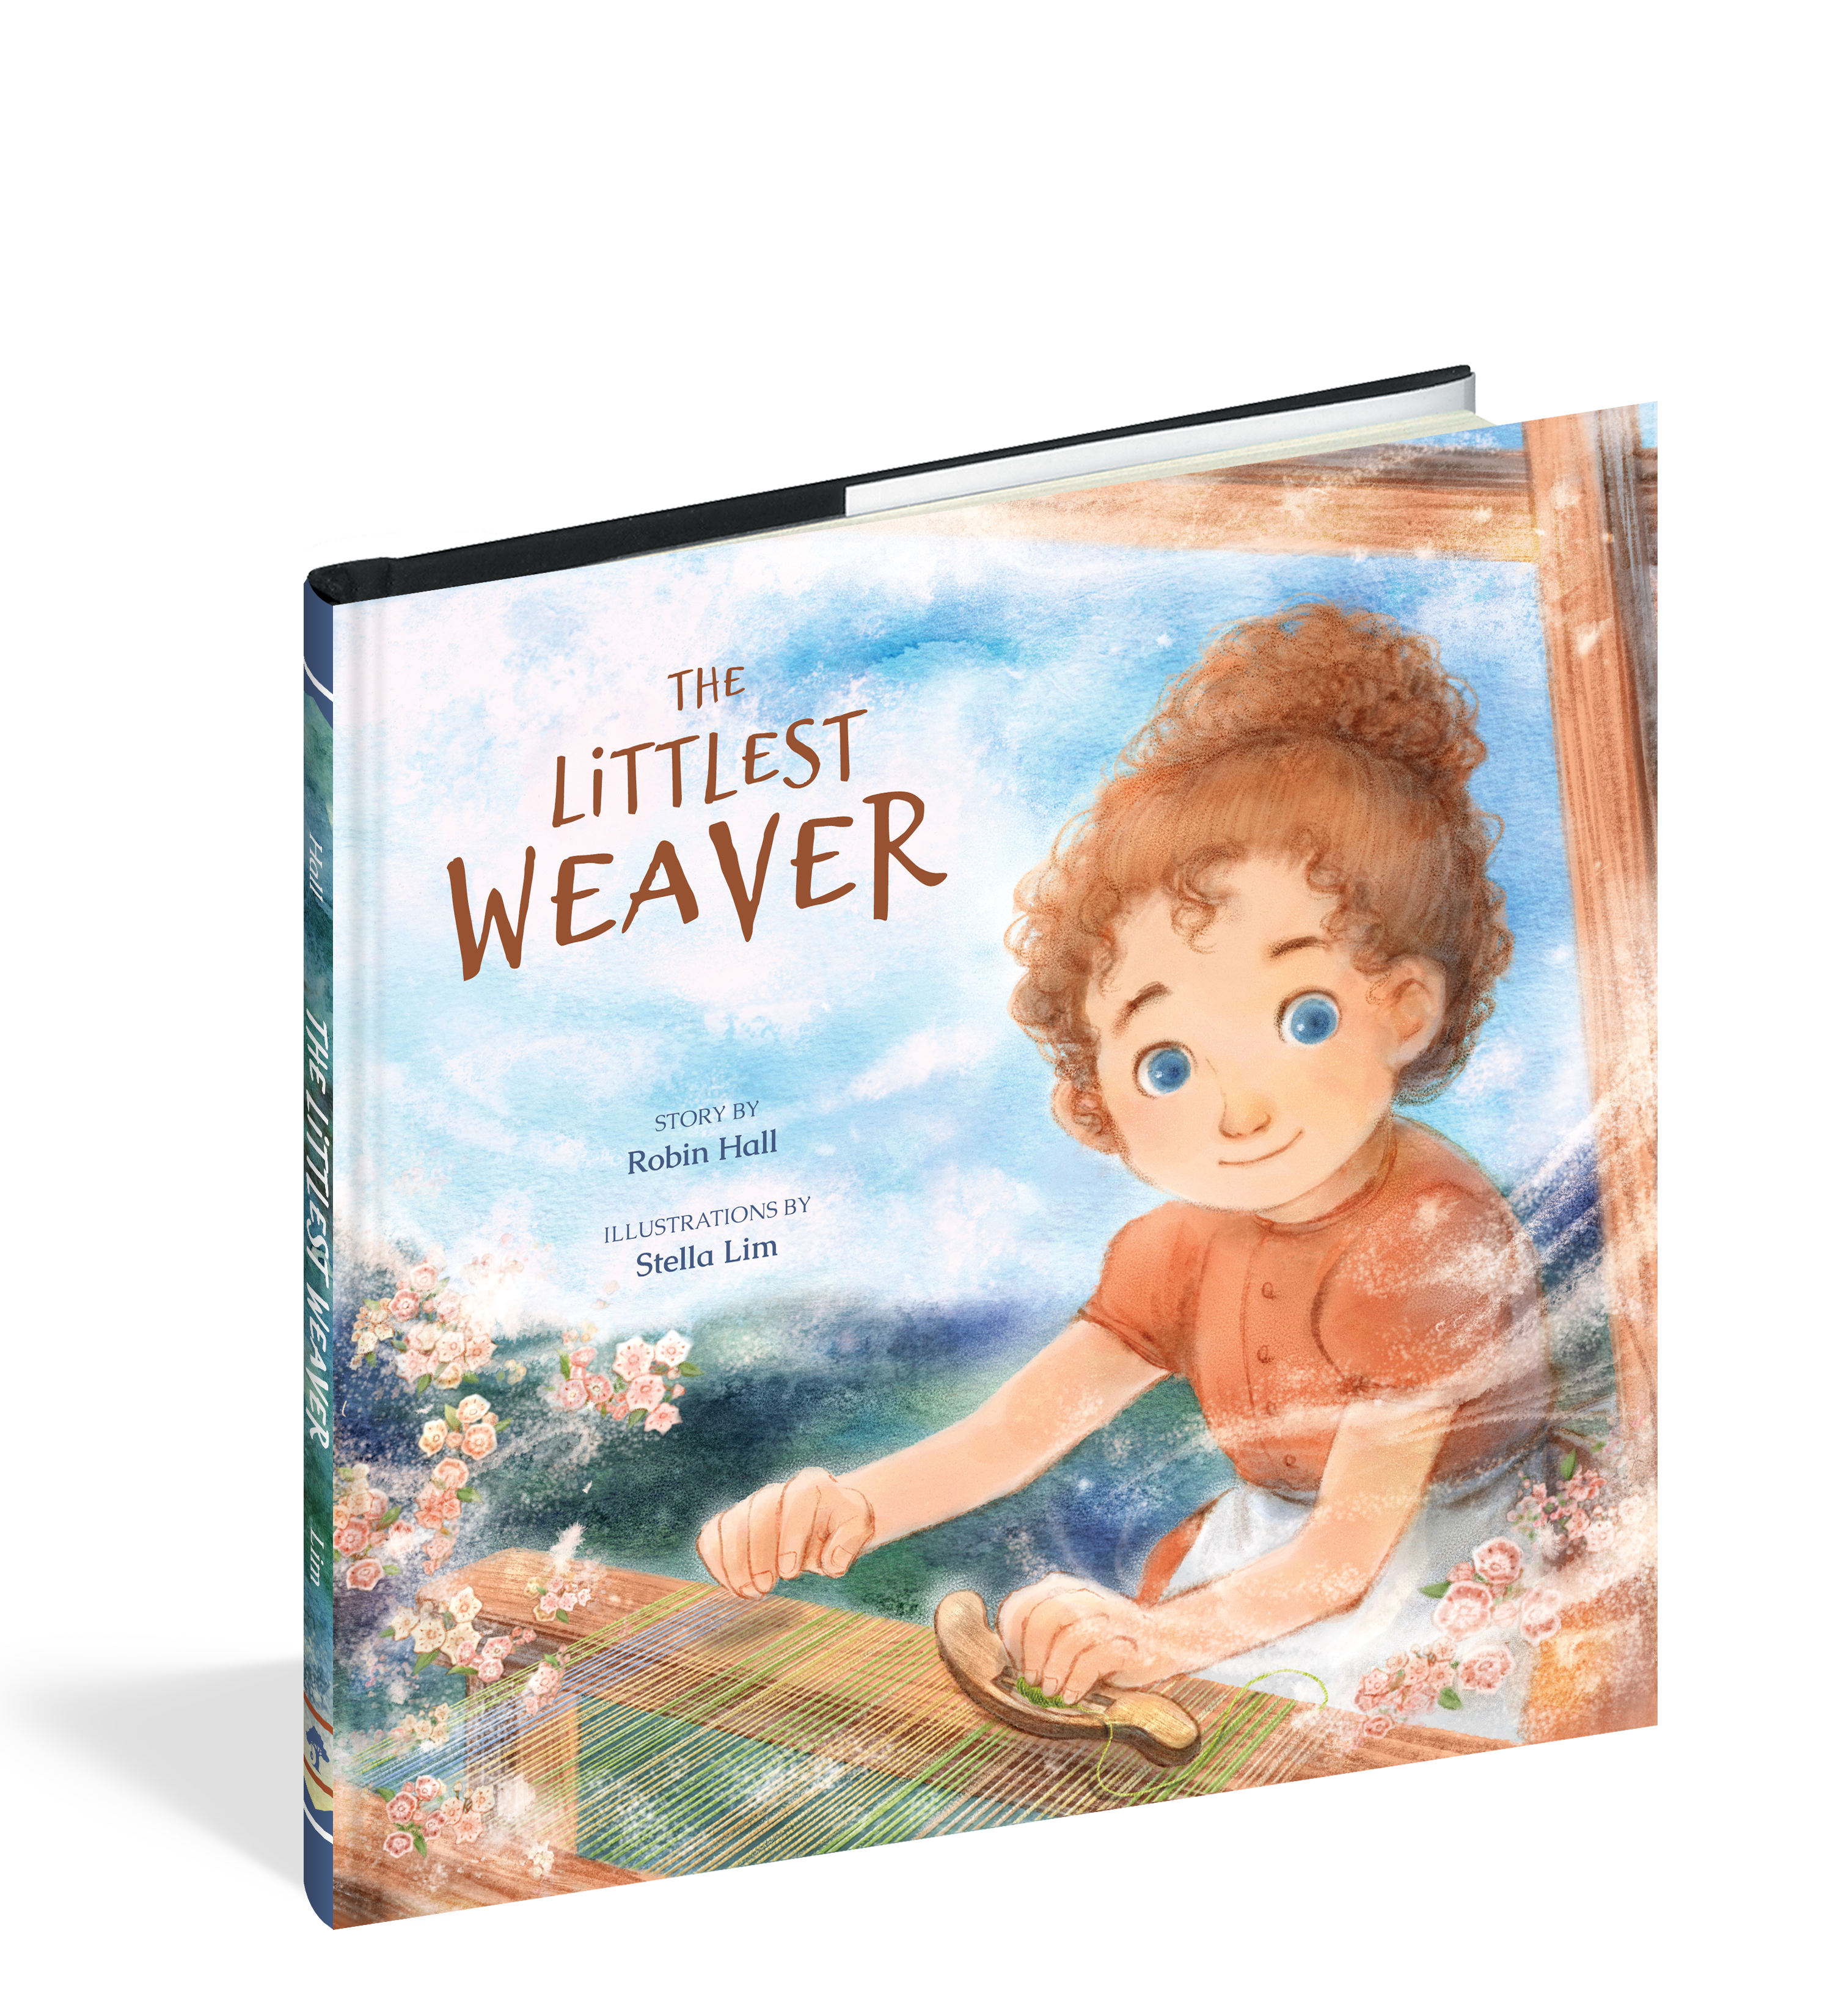 The cover of the picture book The Littlest Weaver.